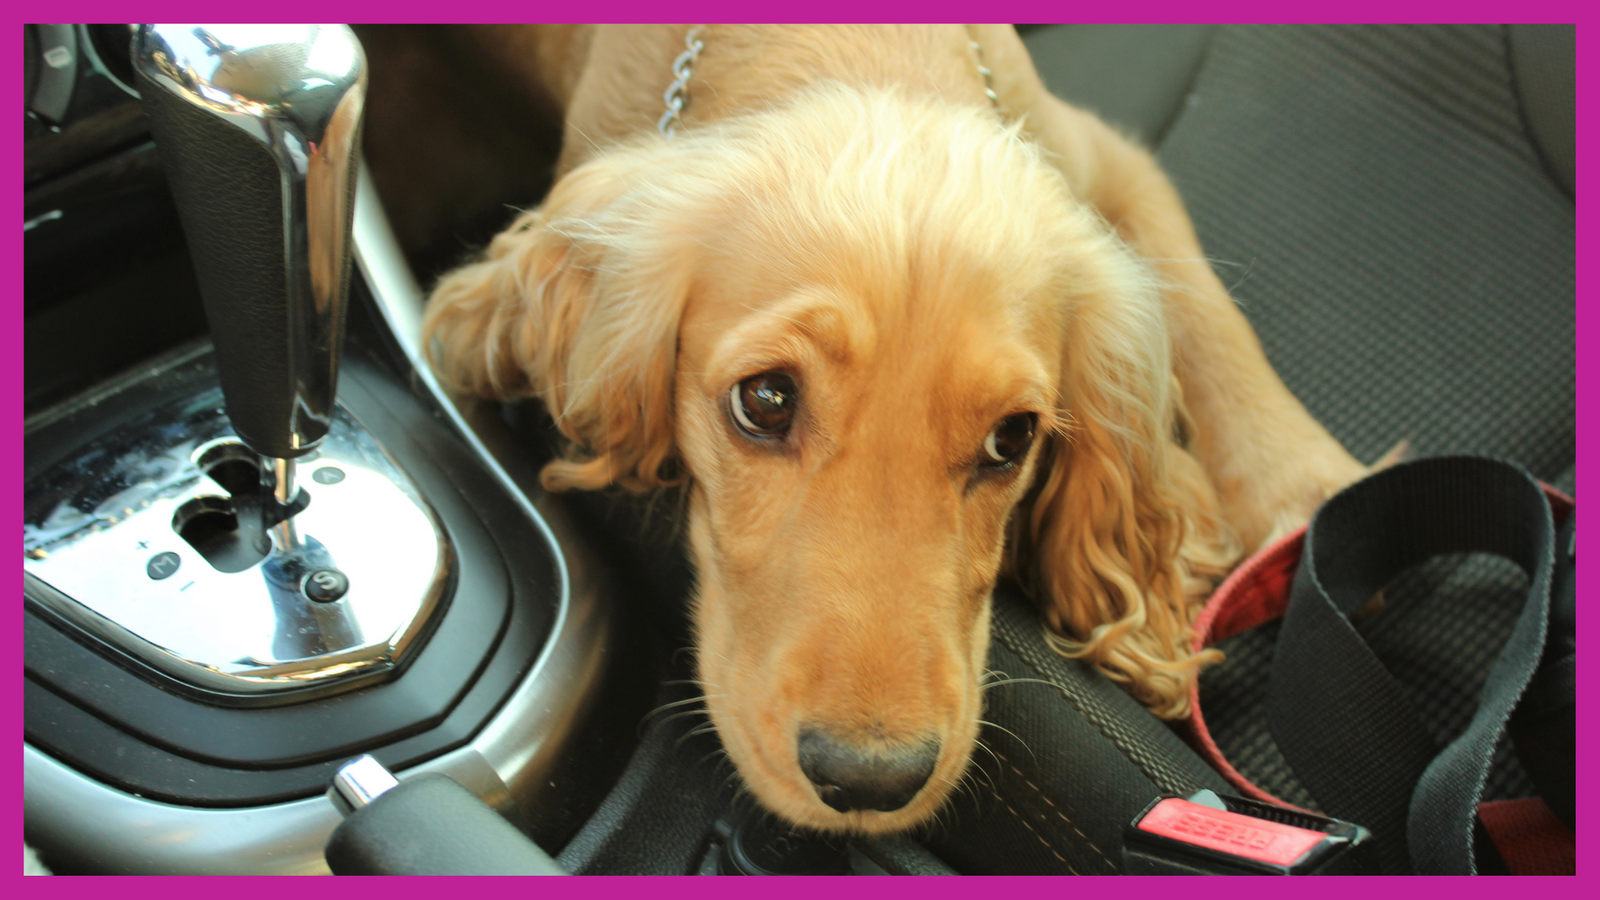 How to Use Dog Seat Belts for Pet Car Safety